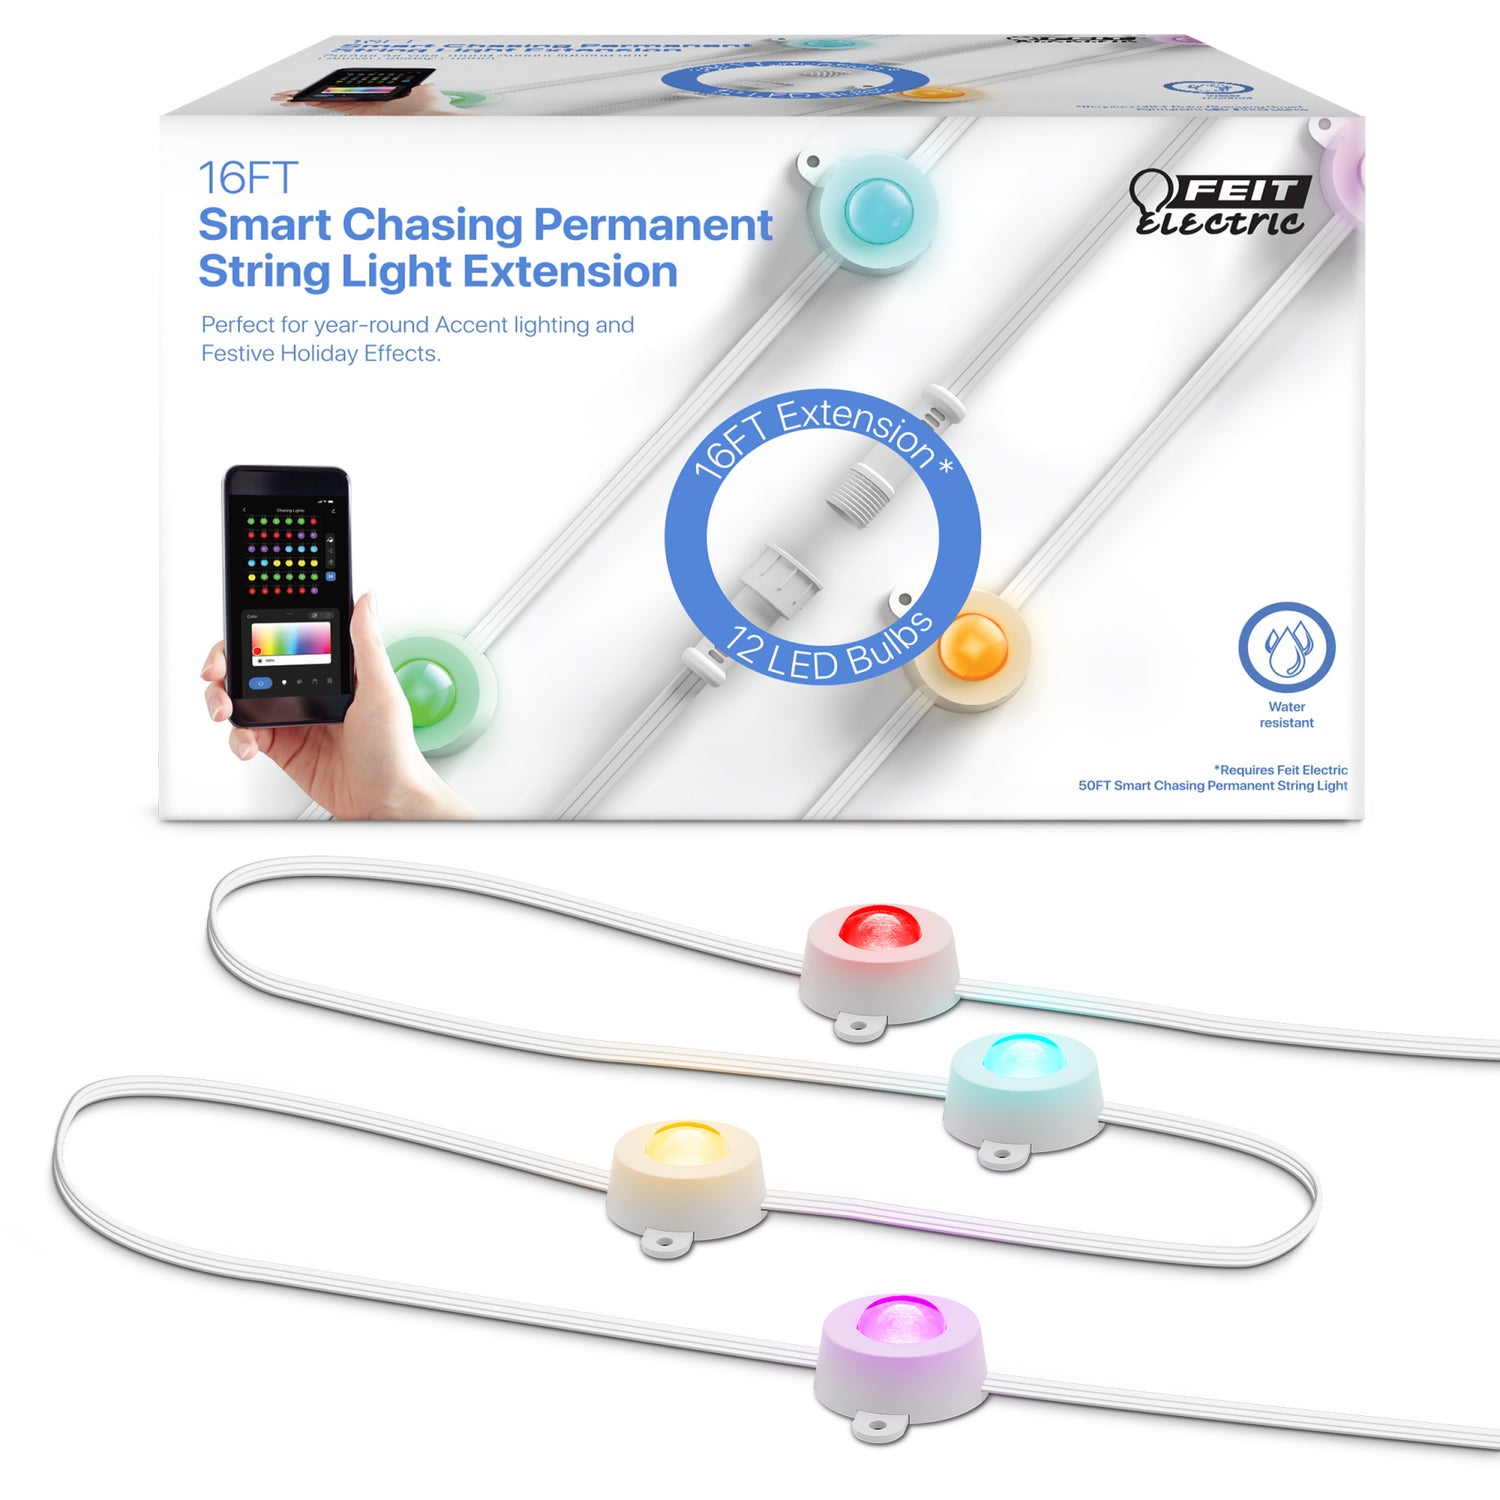 16 ft. Extension for Smart Chasing Permanent Outdoor Lights